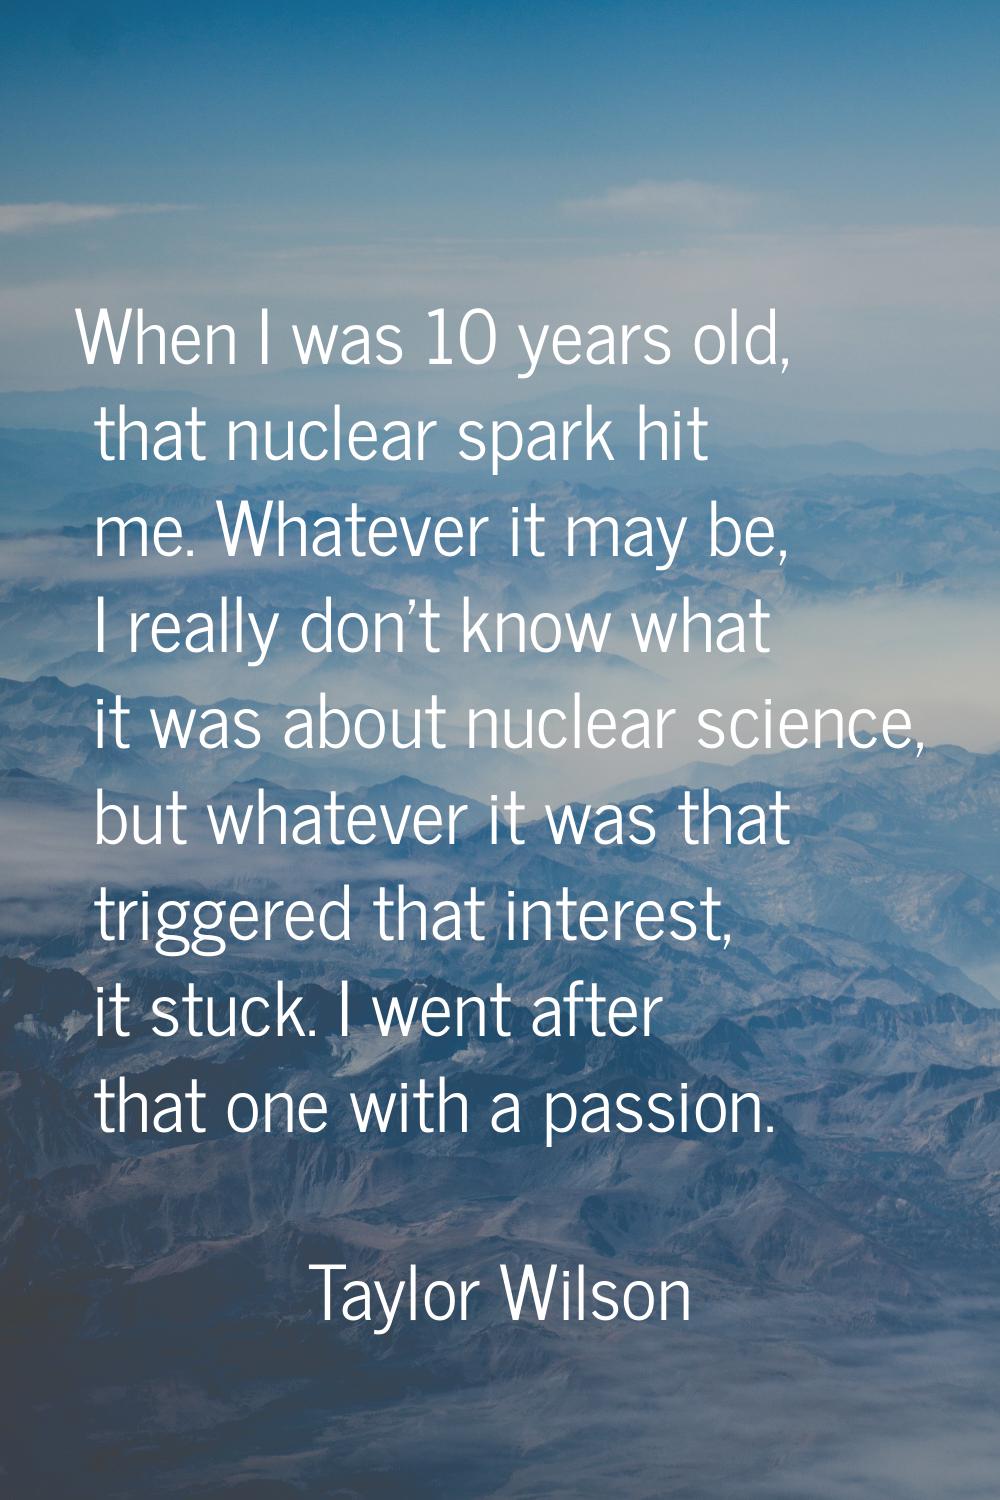 When I was 10 years old, that nuclear spark hit me. Whatever it may be, I really don't know what it